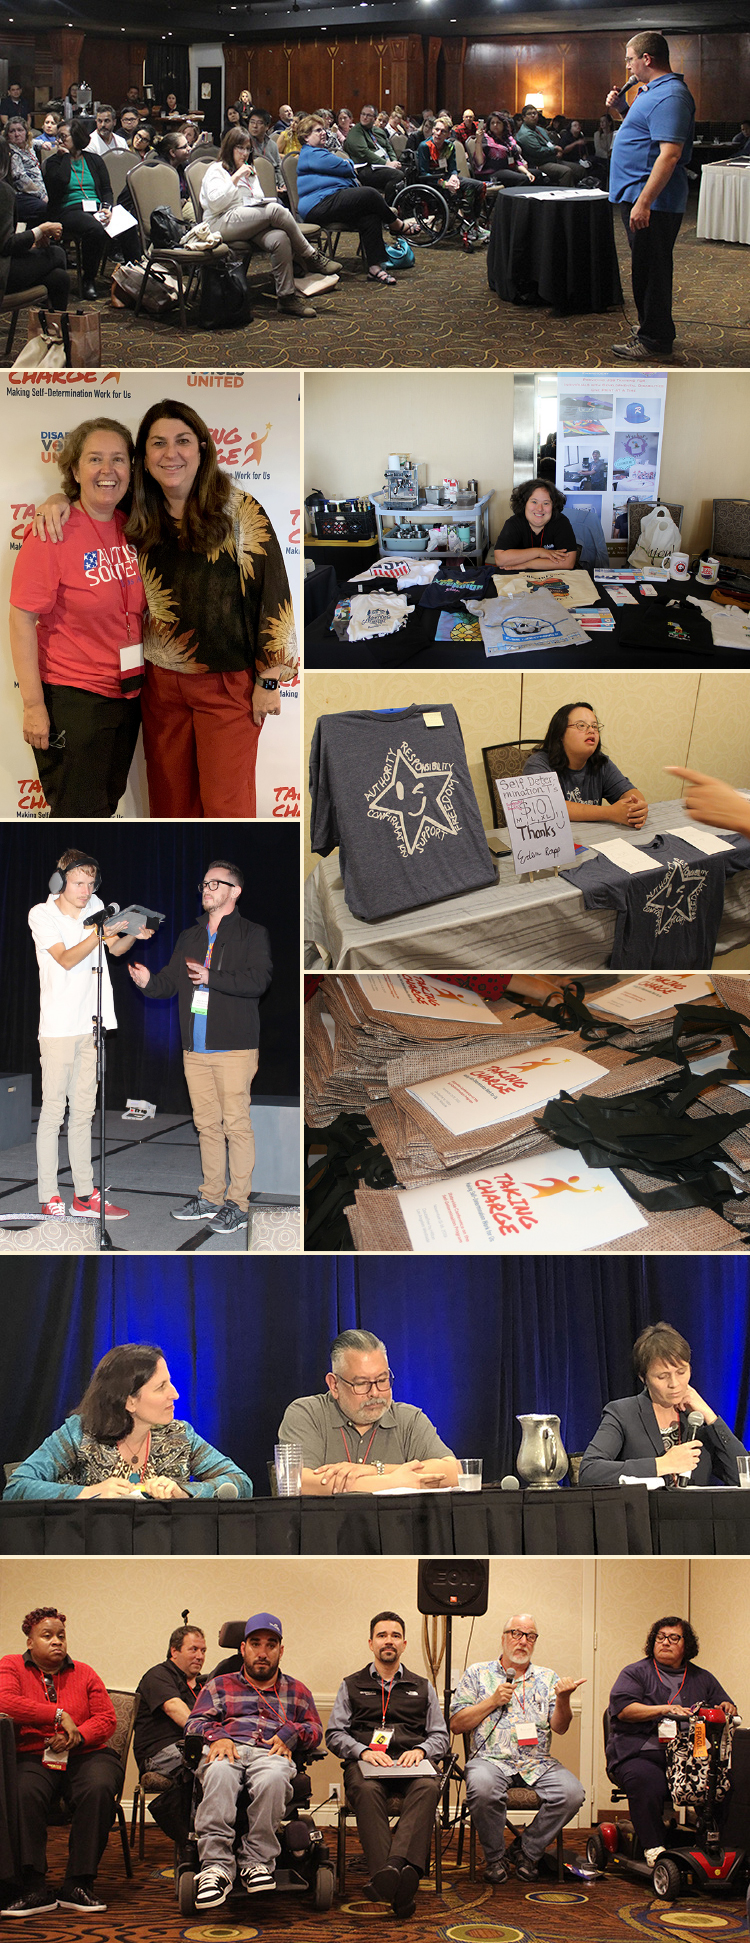 A large collage of various scenes at the Self-Determination Conference including panelists speaking, people tabling, a young man holding his communication device up to a microphone, and many multi-person panels